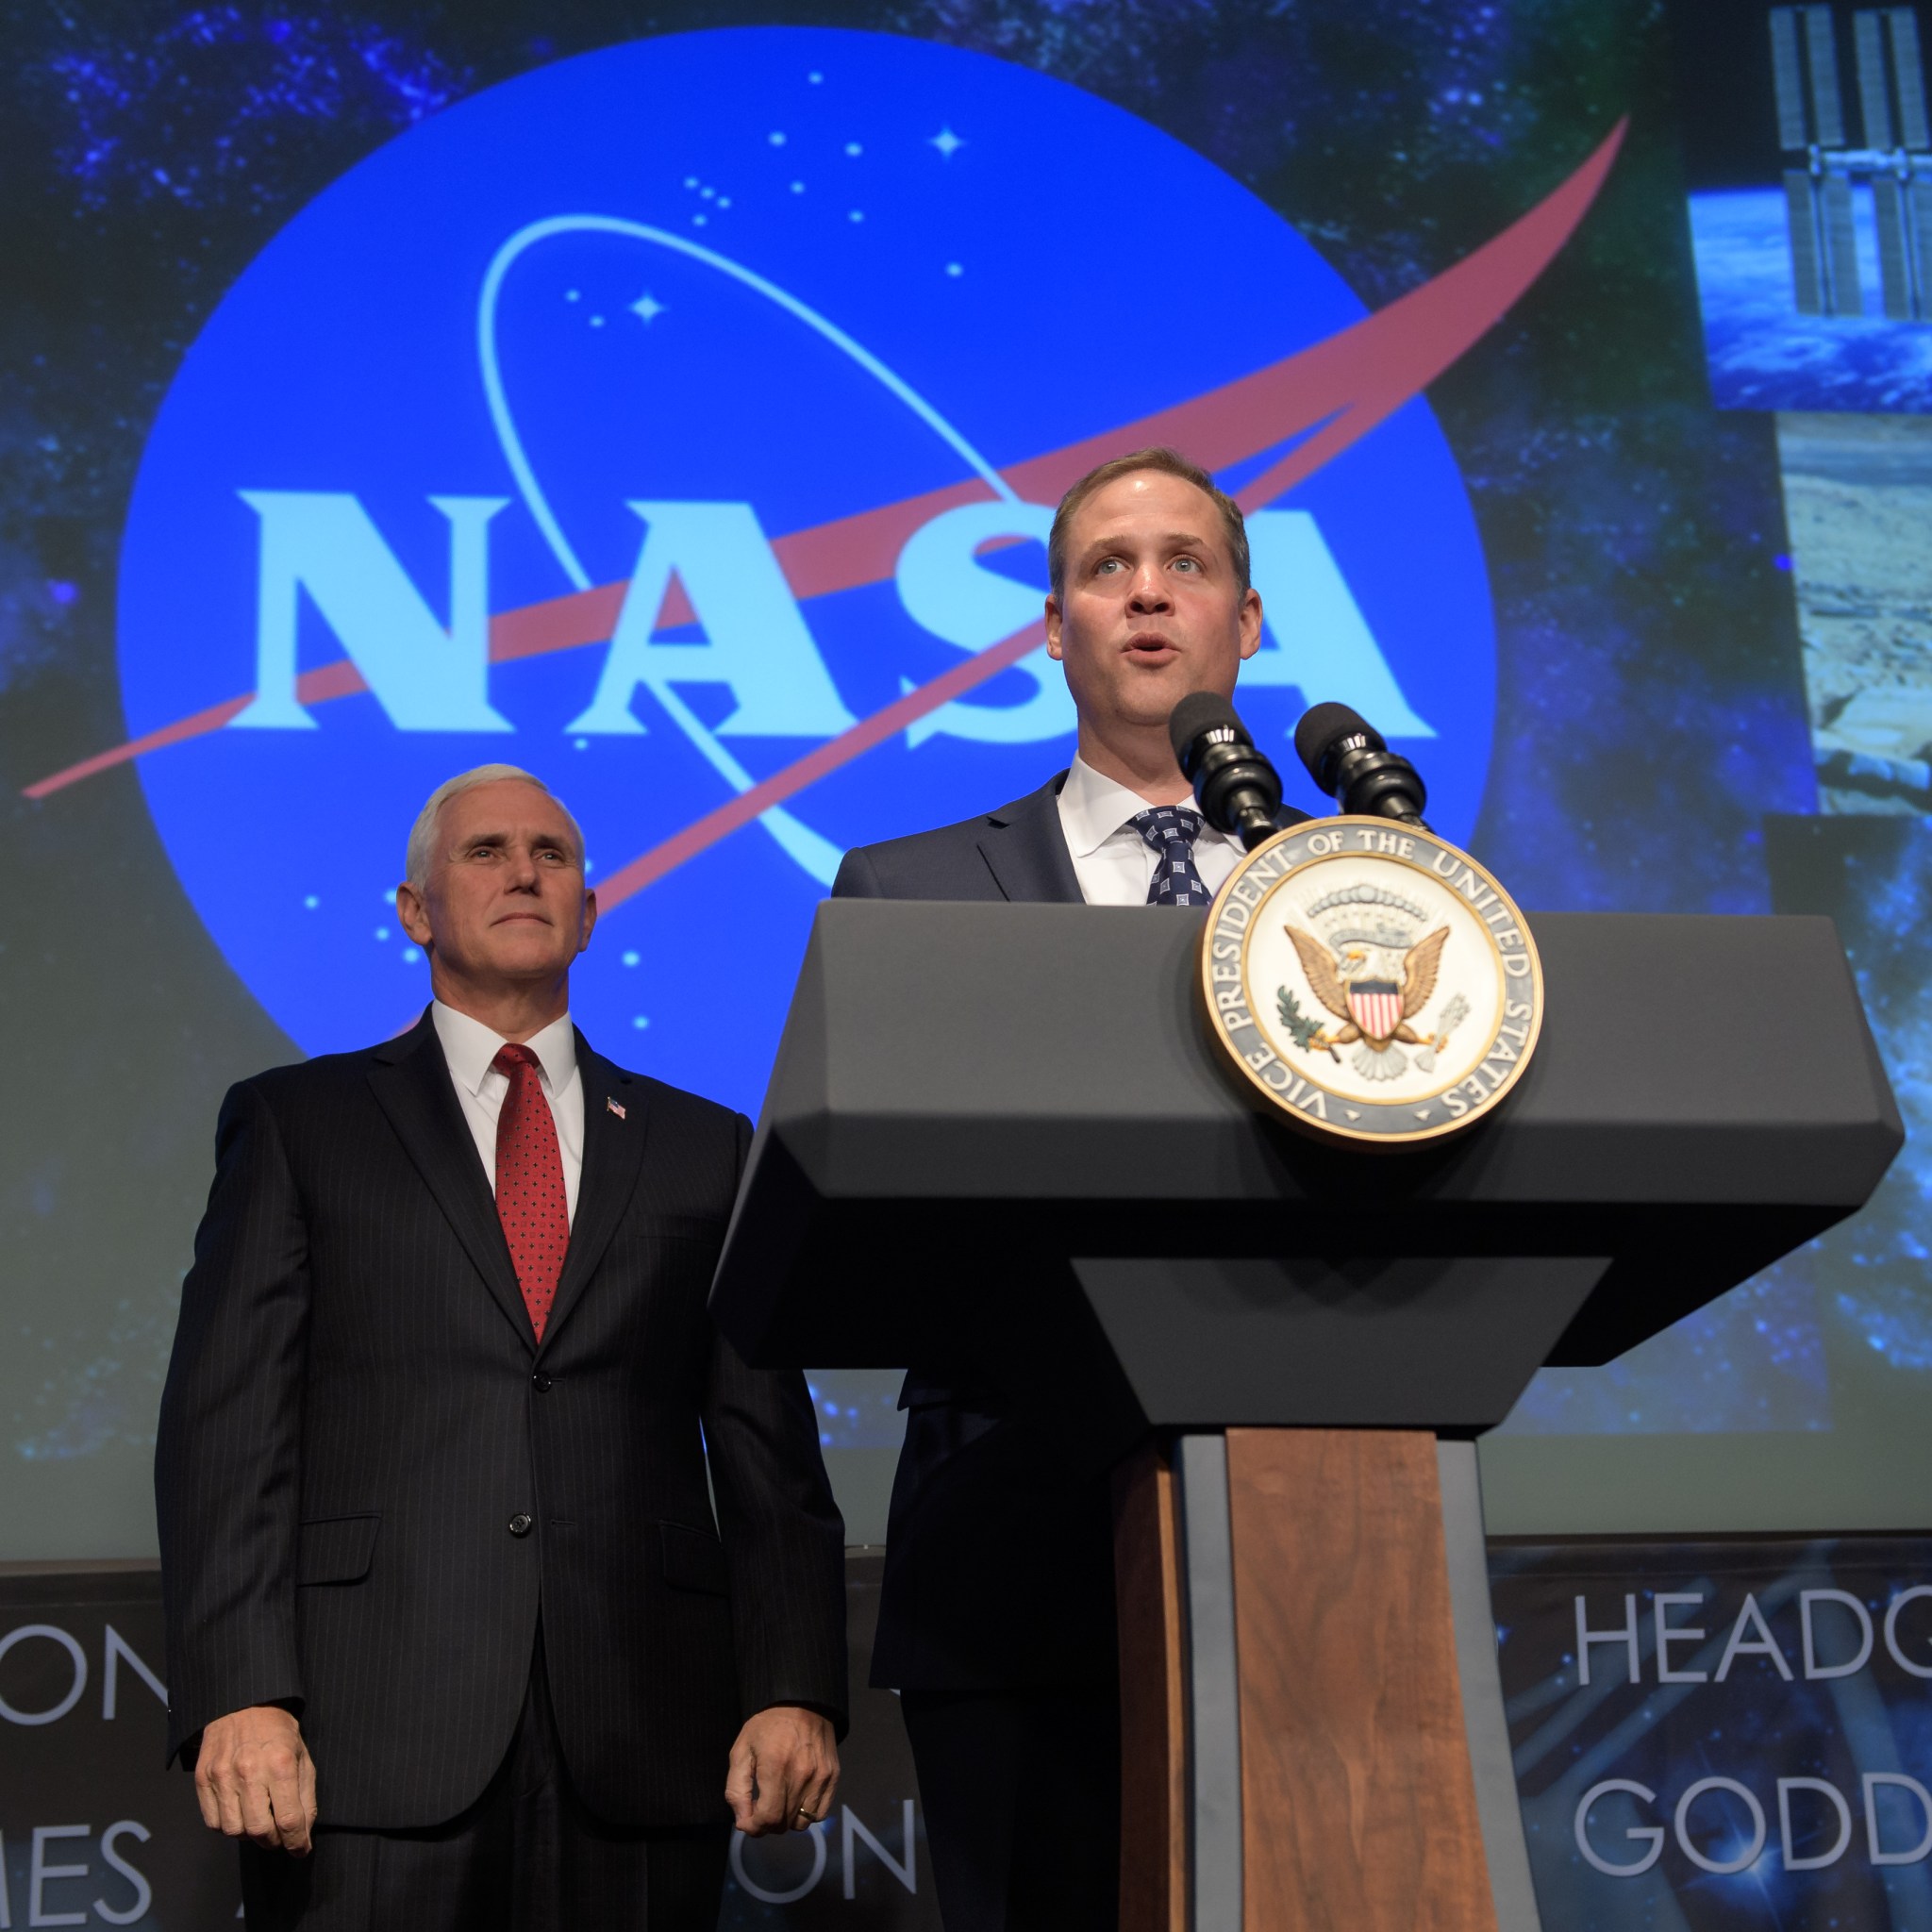 Administrator Bridenstine speaks at podium with Vice President Pence at left